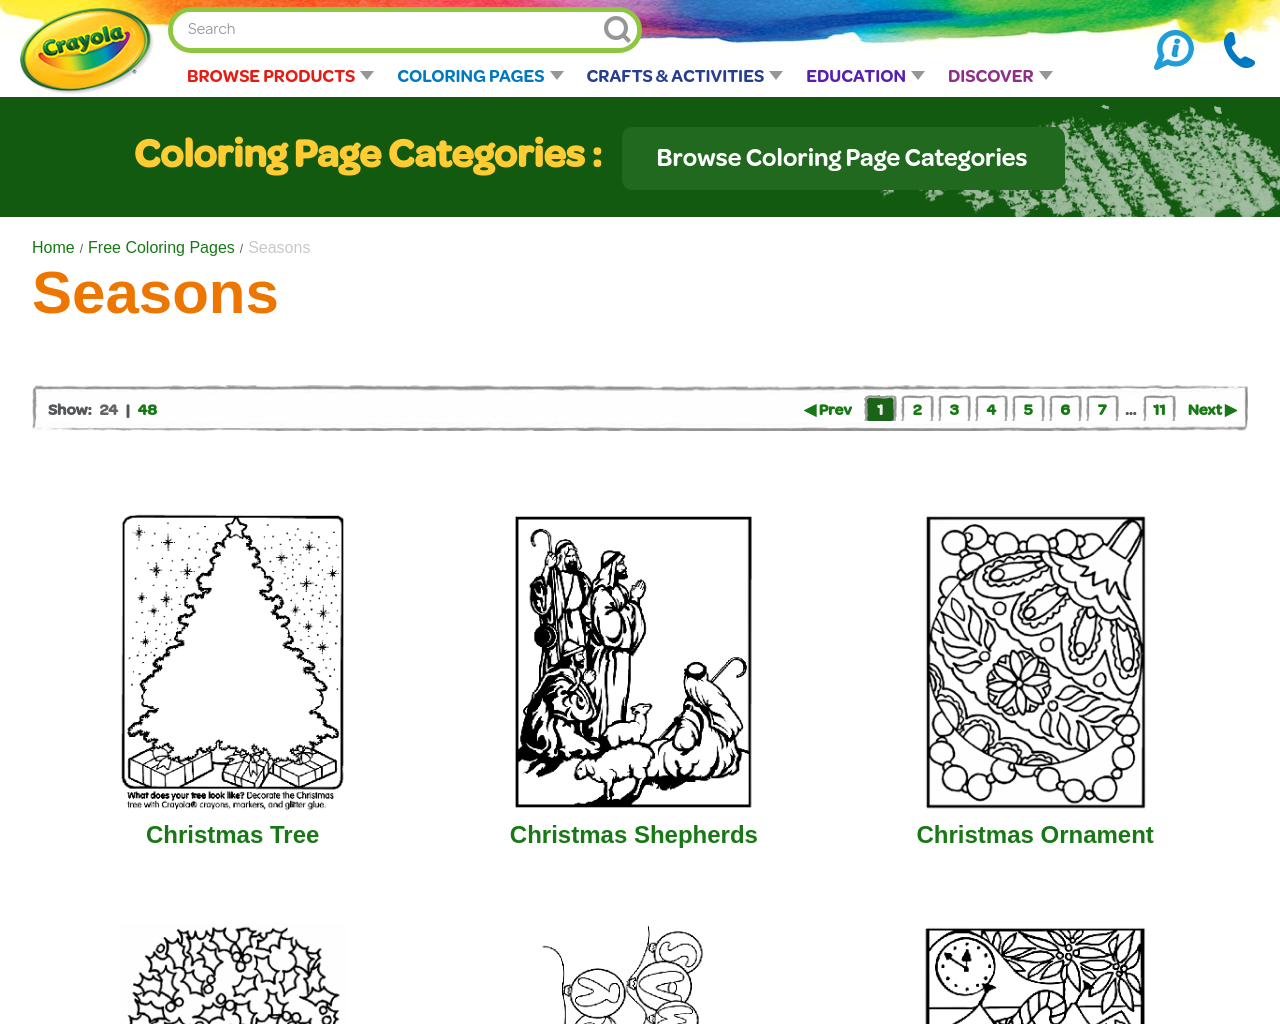 Colouring pages from Crayola